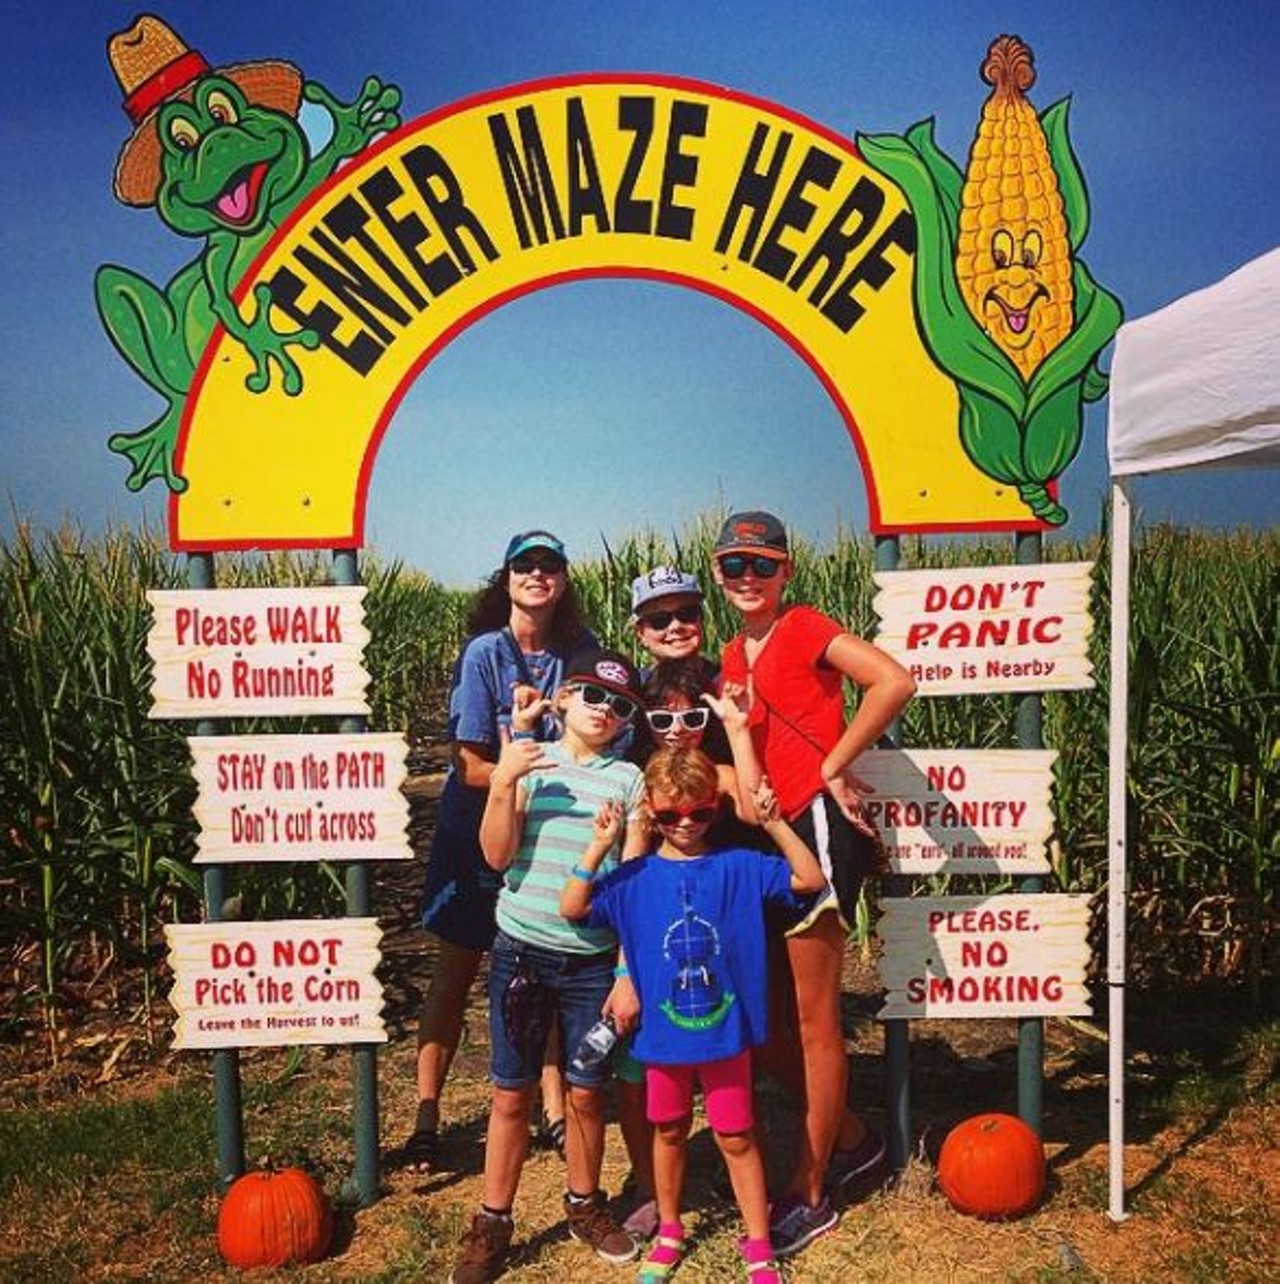 Rocky Creek Maze
784 County Road 251, (361) 772-4718, rockycreekmaze.org
Plan a day trip out east to visit this Moulton-based maze. Venture through the eight-acre maze, then take it easy with a hayride and fun games for the kids. Open Fridays through Sundays, October 6 through November 19.
Photo via Instagram, sumsurf